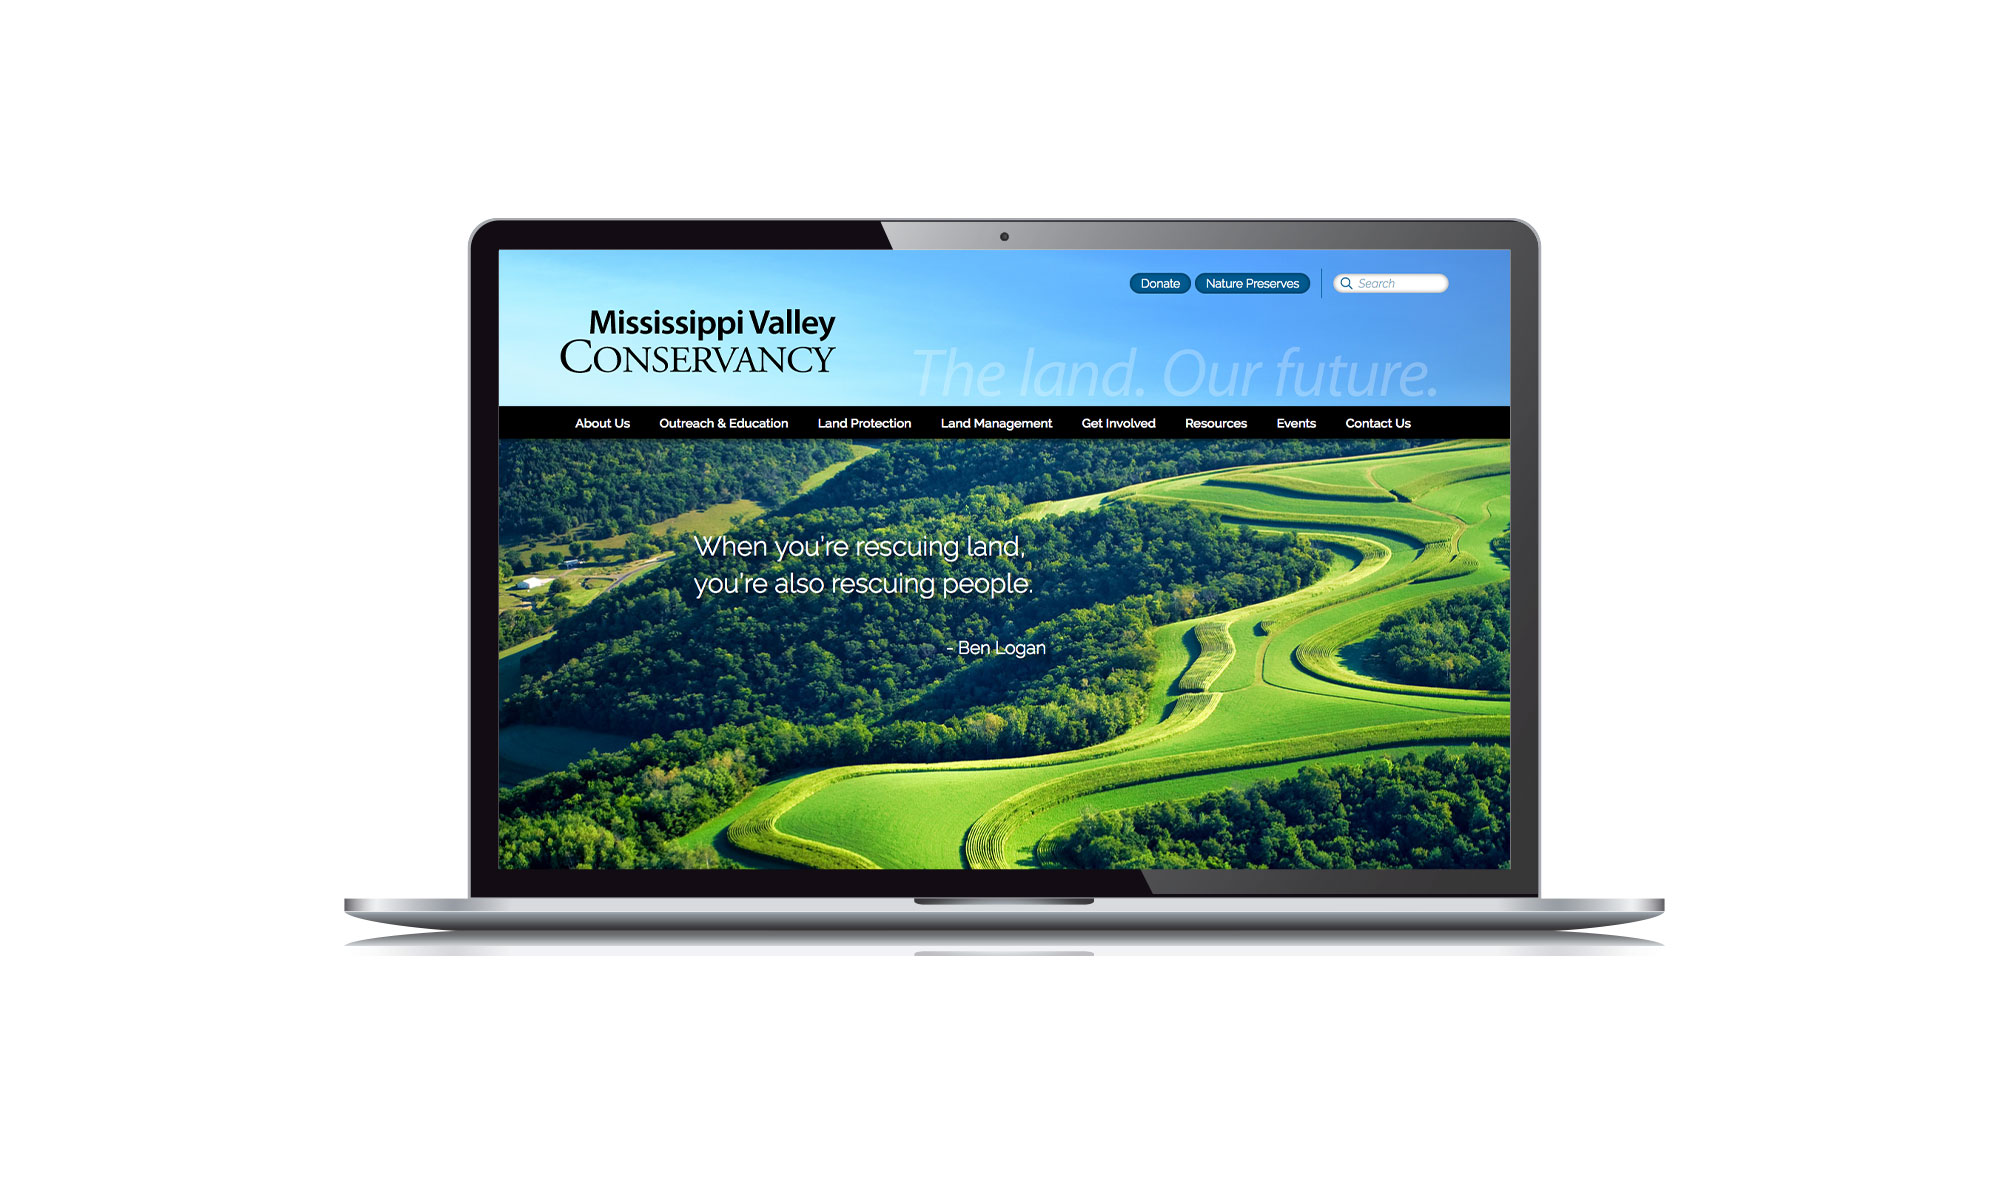 Home page of the Mississippi Valley Conservancy website created by Vendi Advertising displayed on a laptop screen